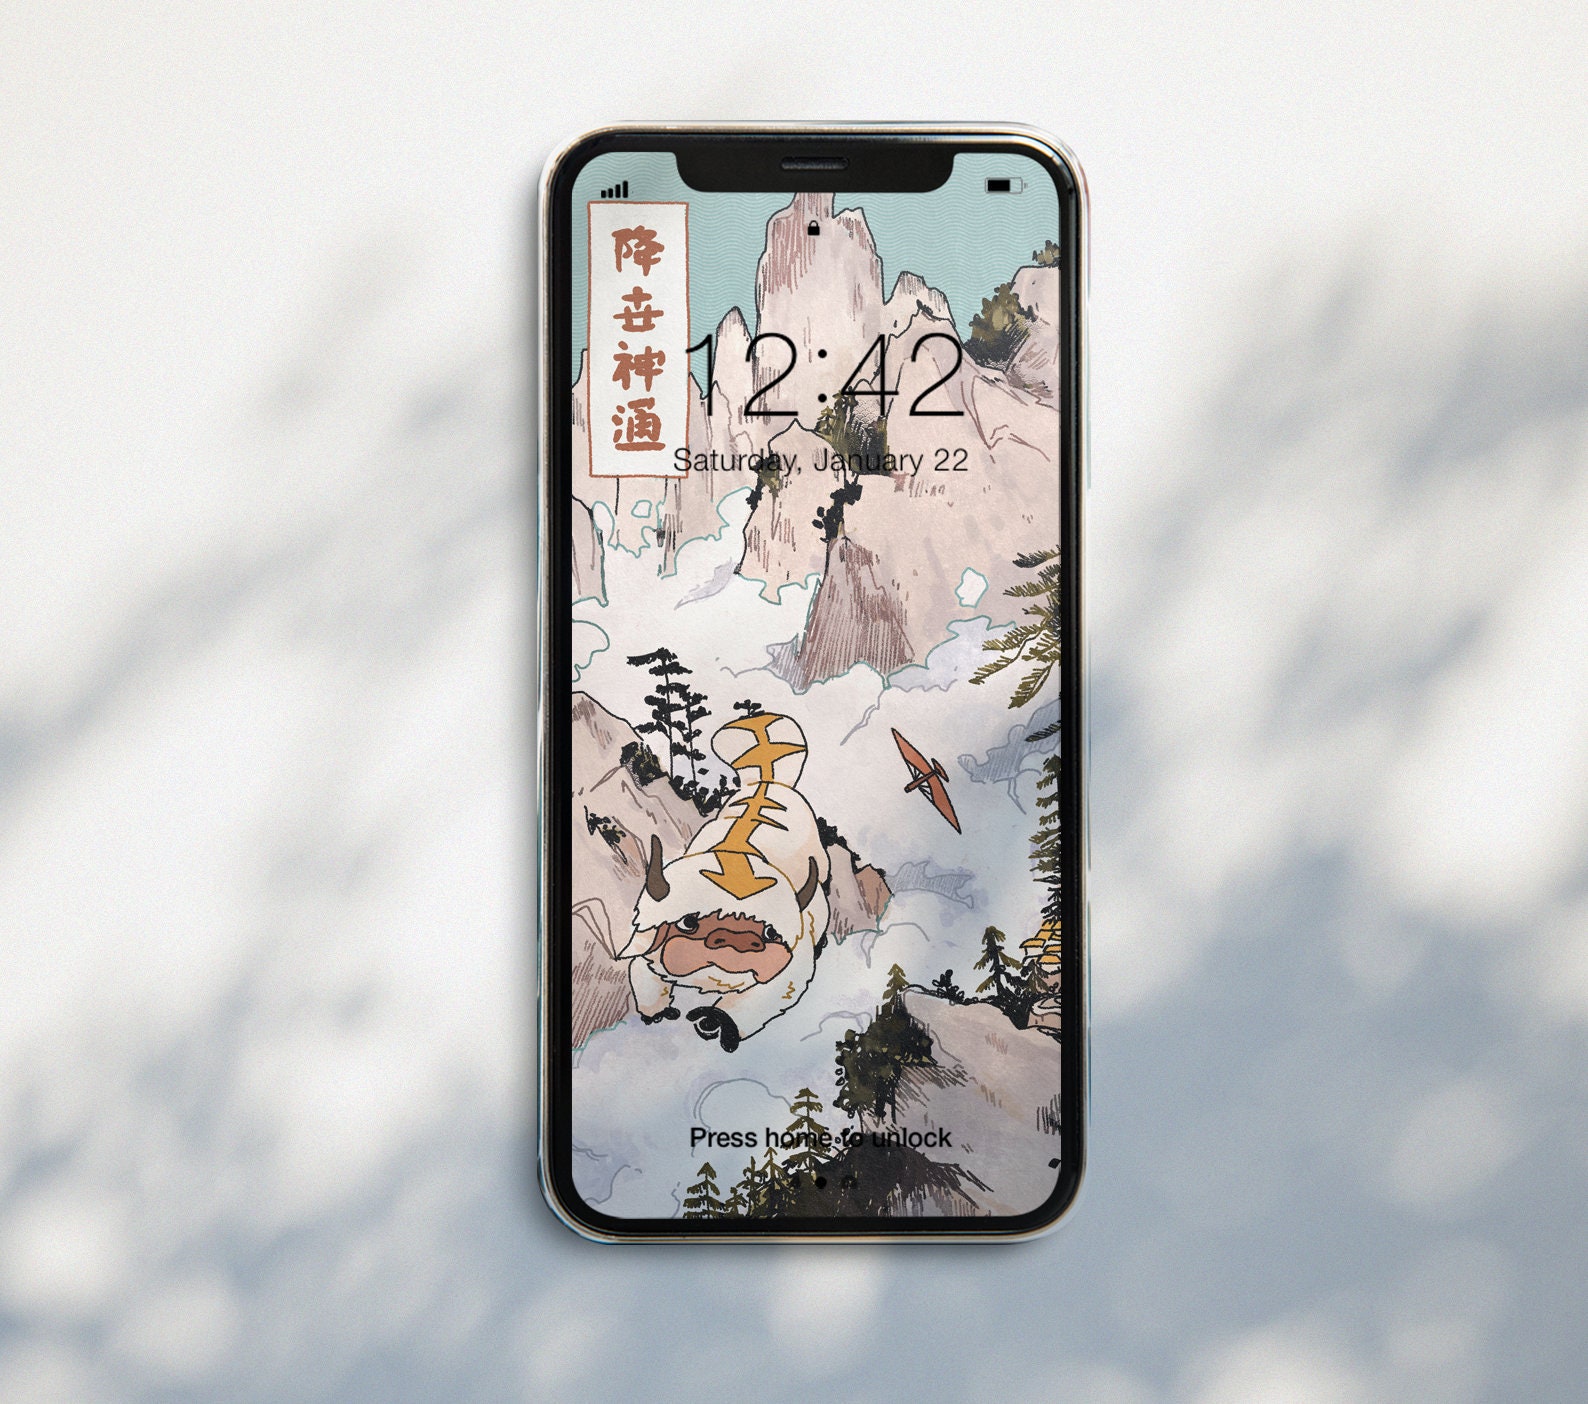 Free download appa phone wallpaper avatar the last airbender iphone etsy x for your desktop mobile tablet explore avatar aang iphone wallpapers avatar airbender wallpaper zuko avatar wallpaper avatar wallpapers